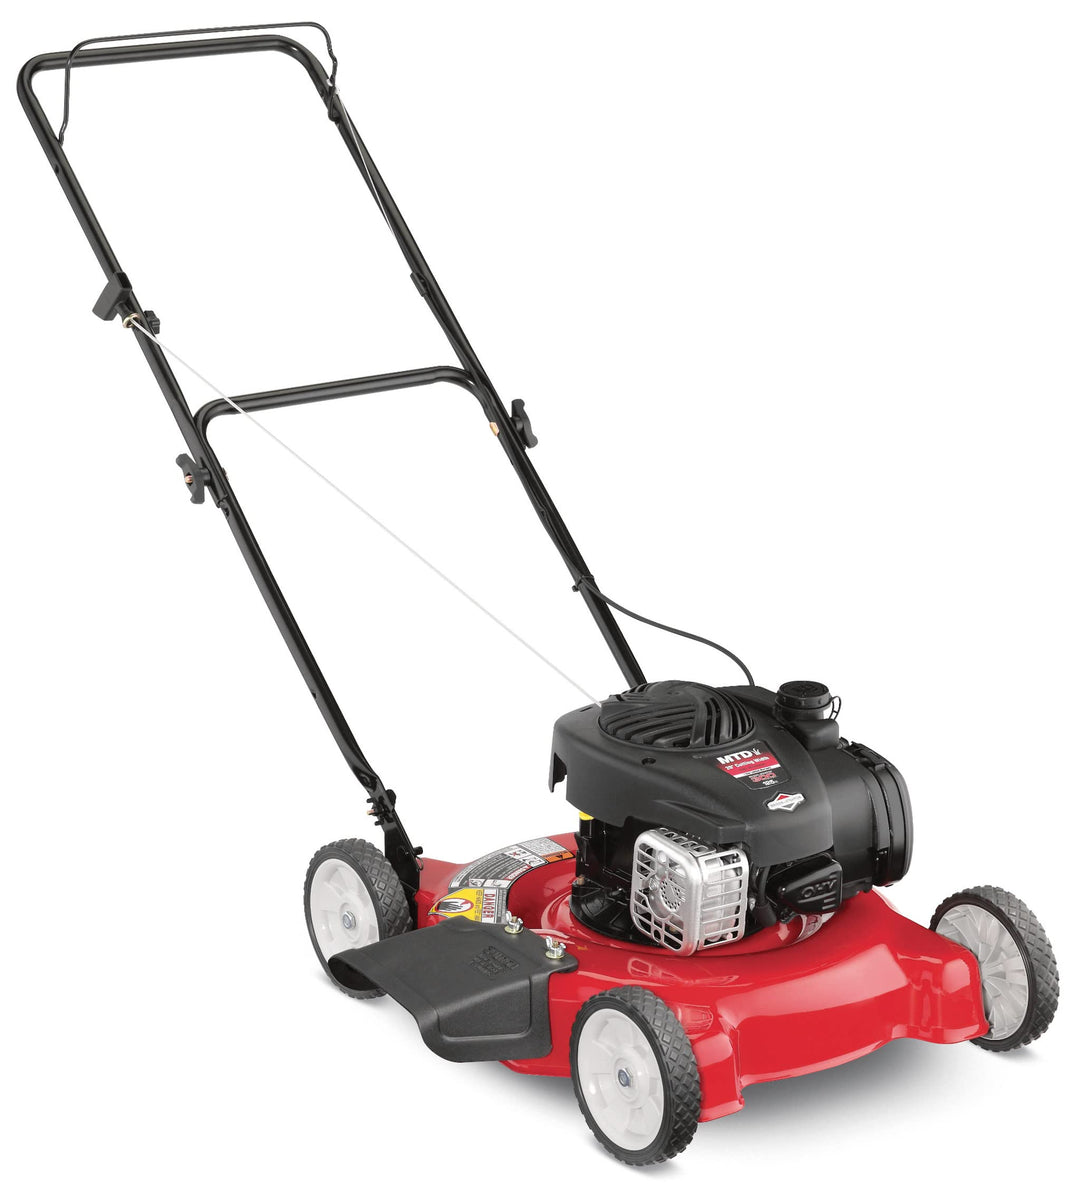 Restored Yard Machines 11A-02BT729 20-in Push Lawn Mower with 125cc Briggs & Stratton Gas Powered Engine, Black and Red (Refurbished)